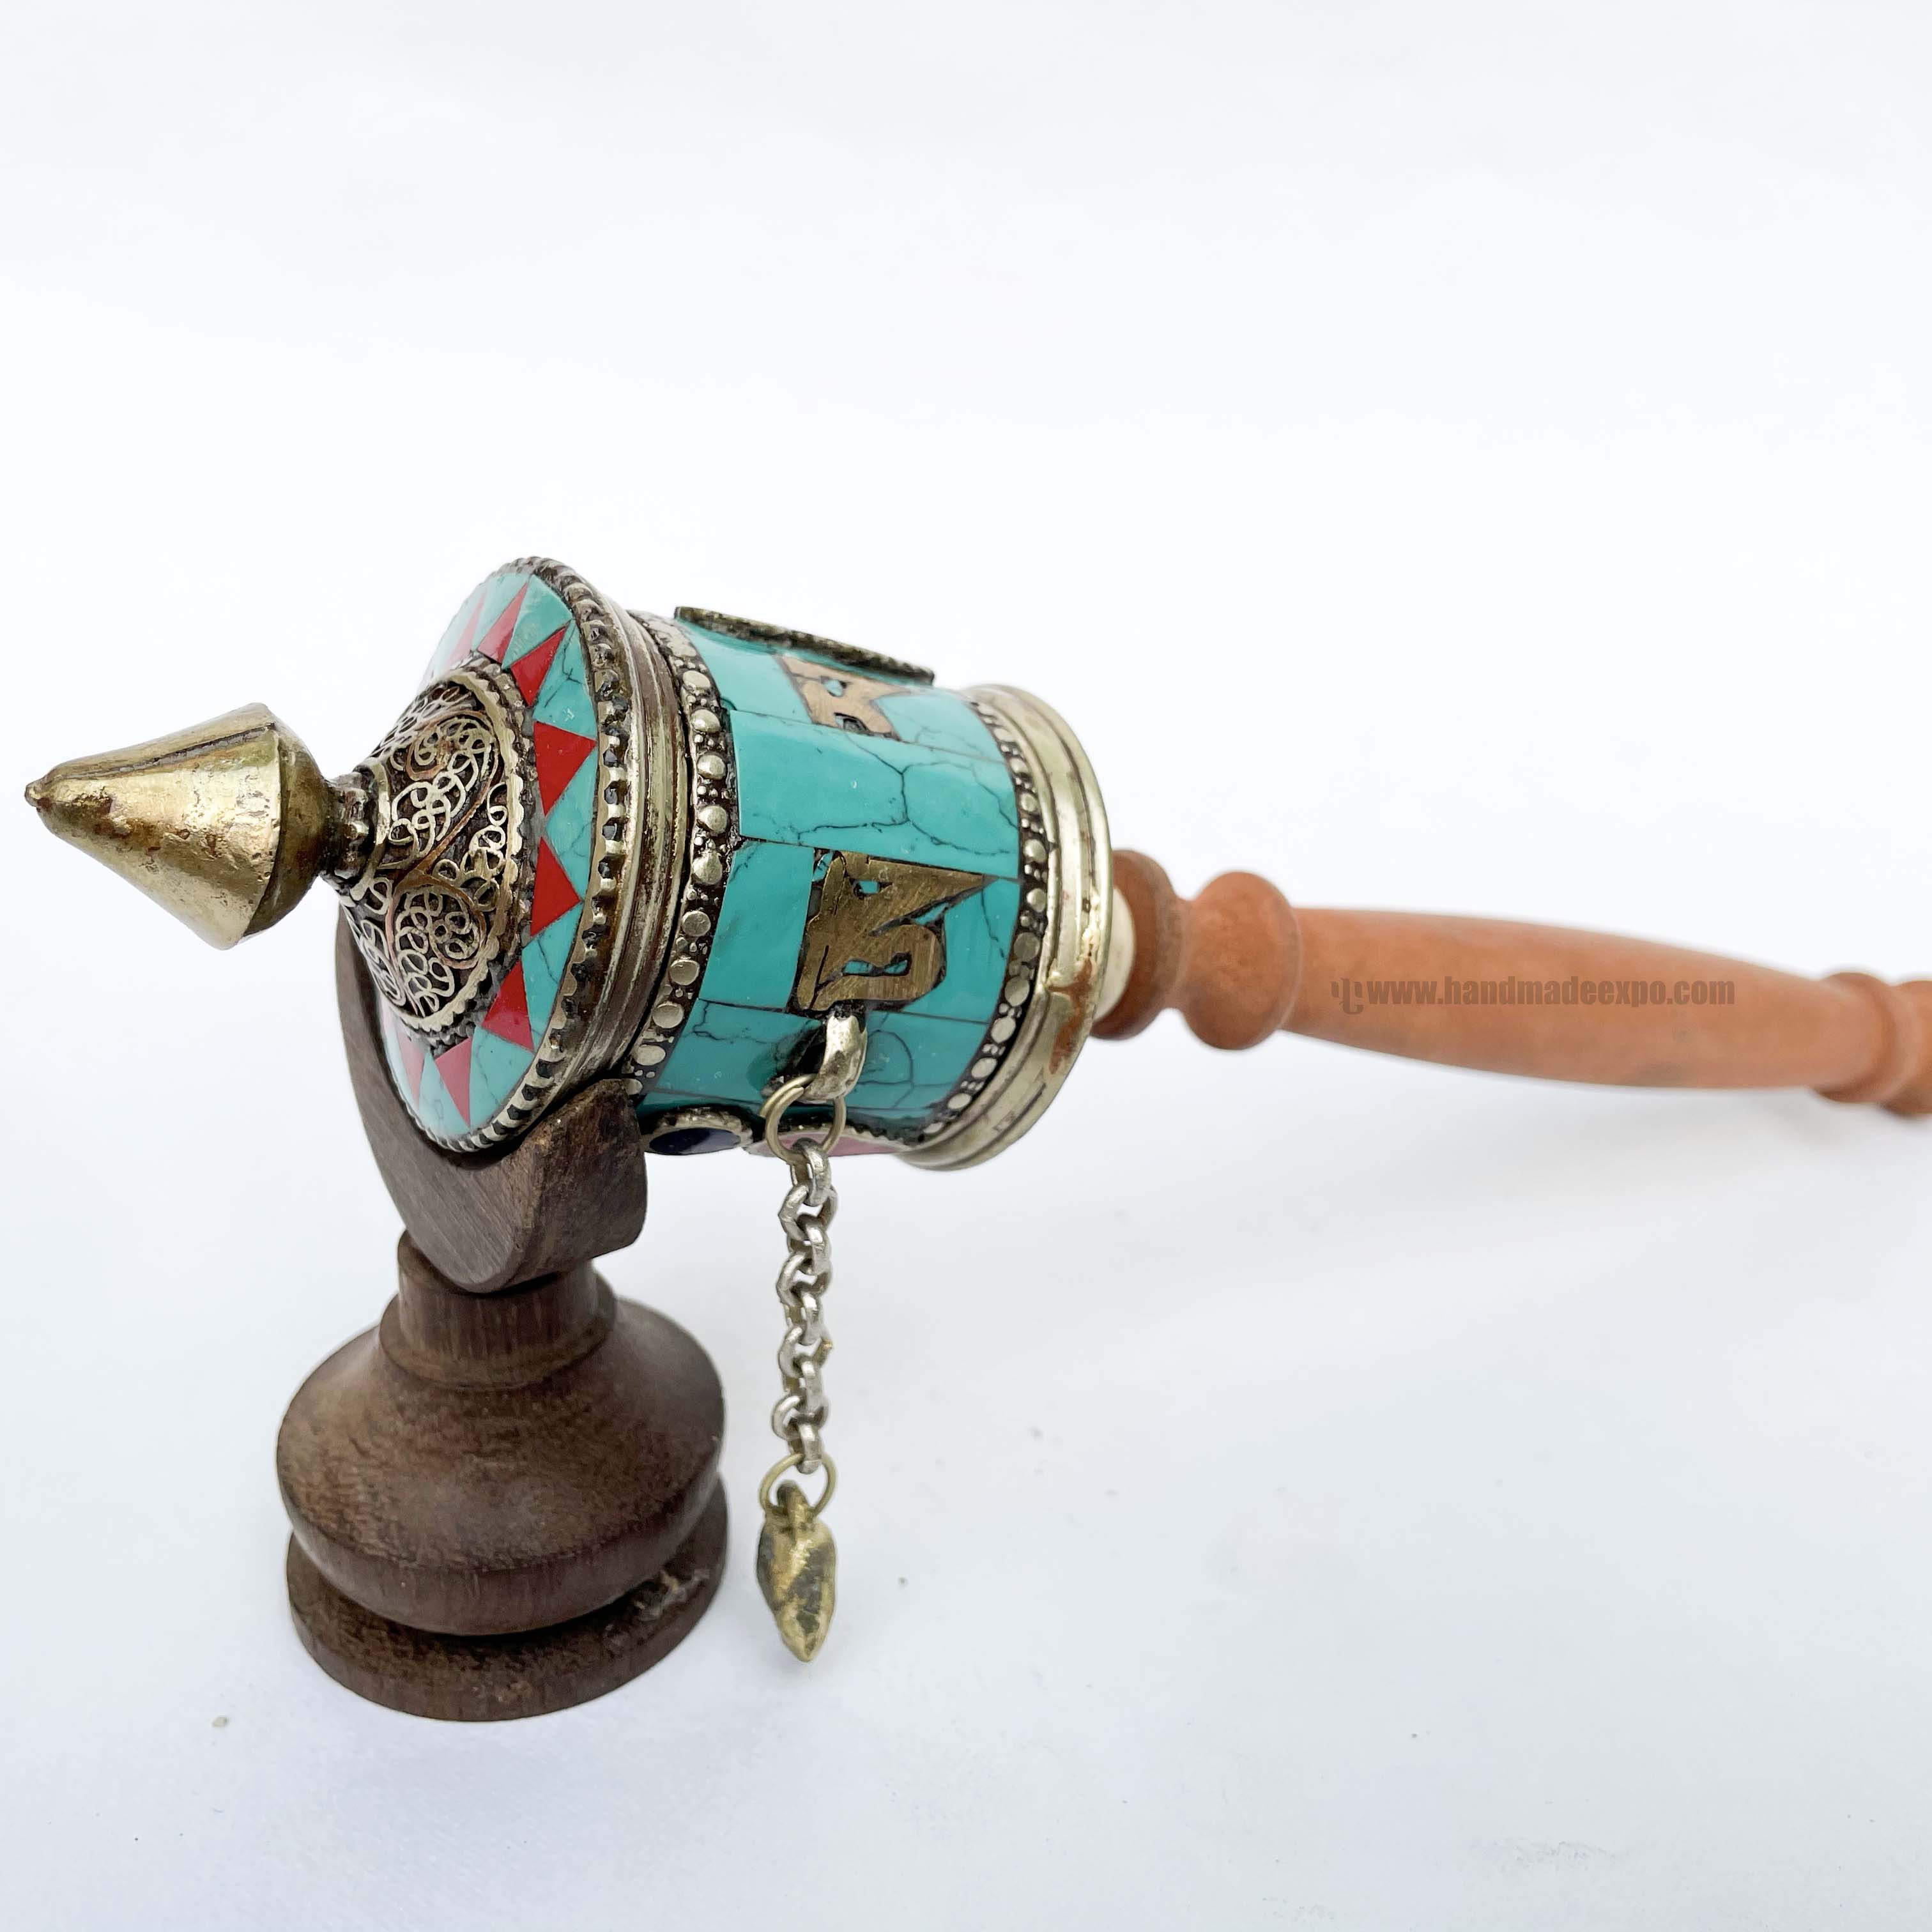 Sikku Brass Hand Held With Mantra Prayer Wheel, blue Color